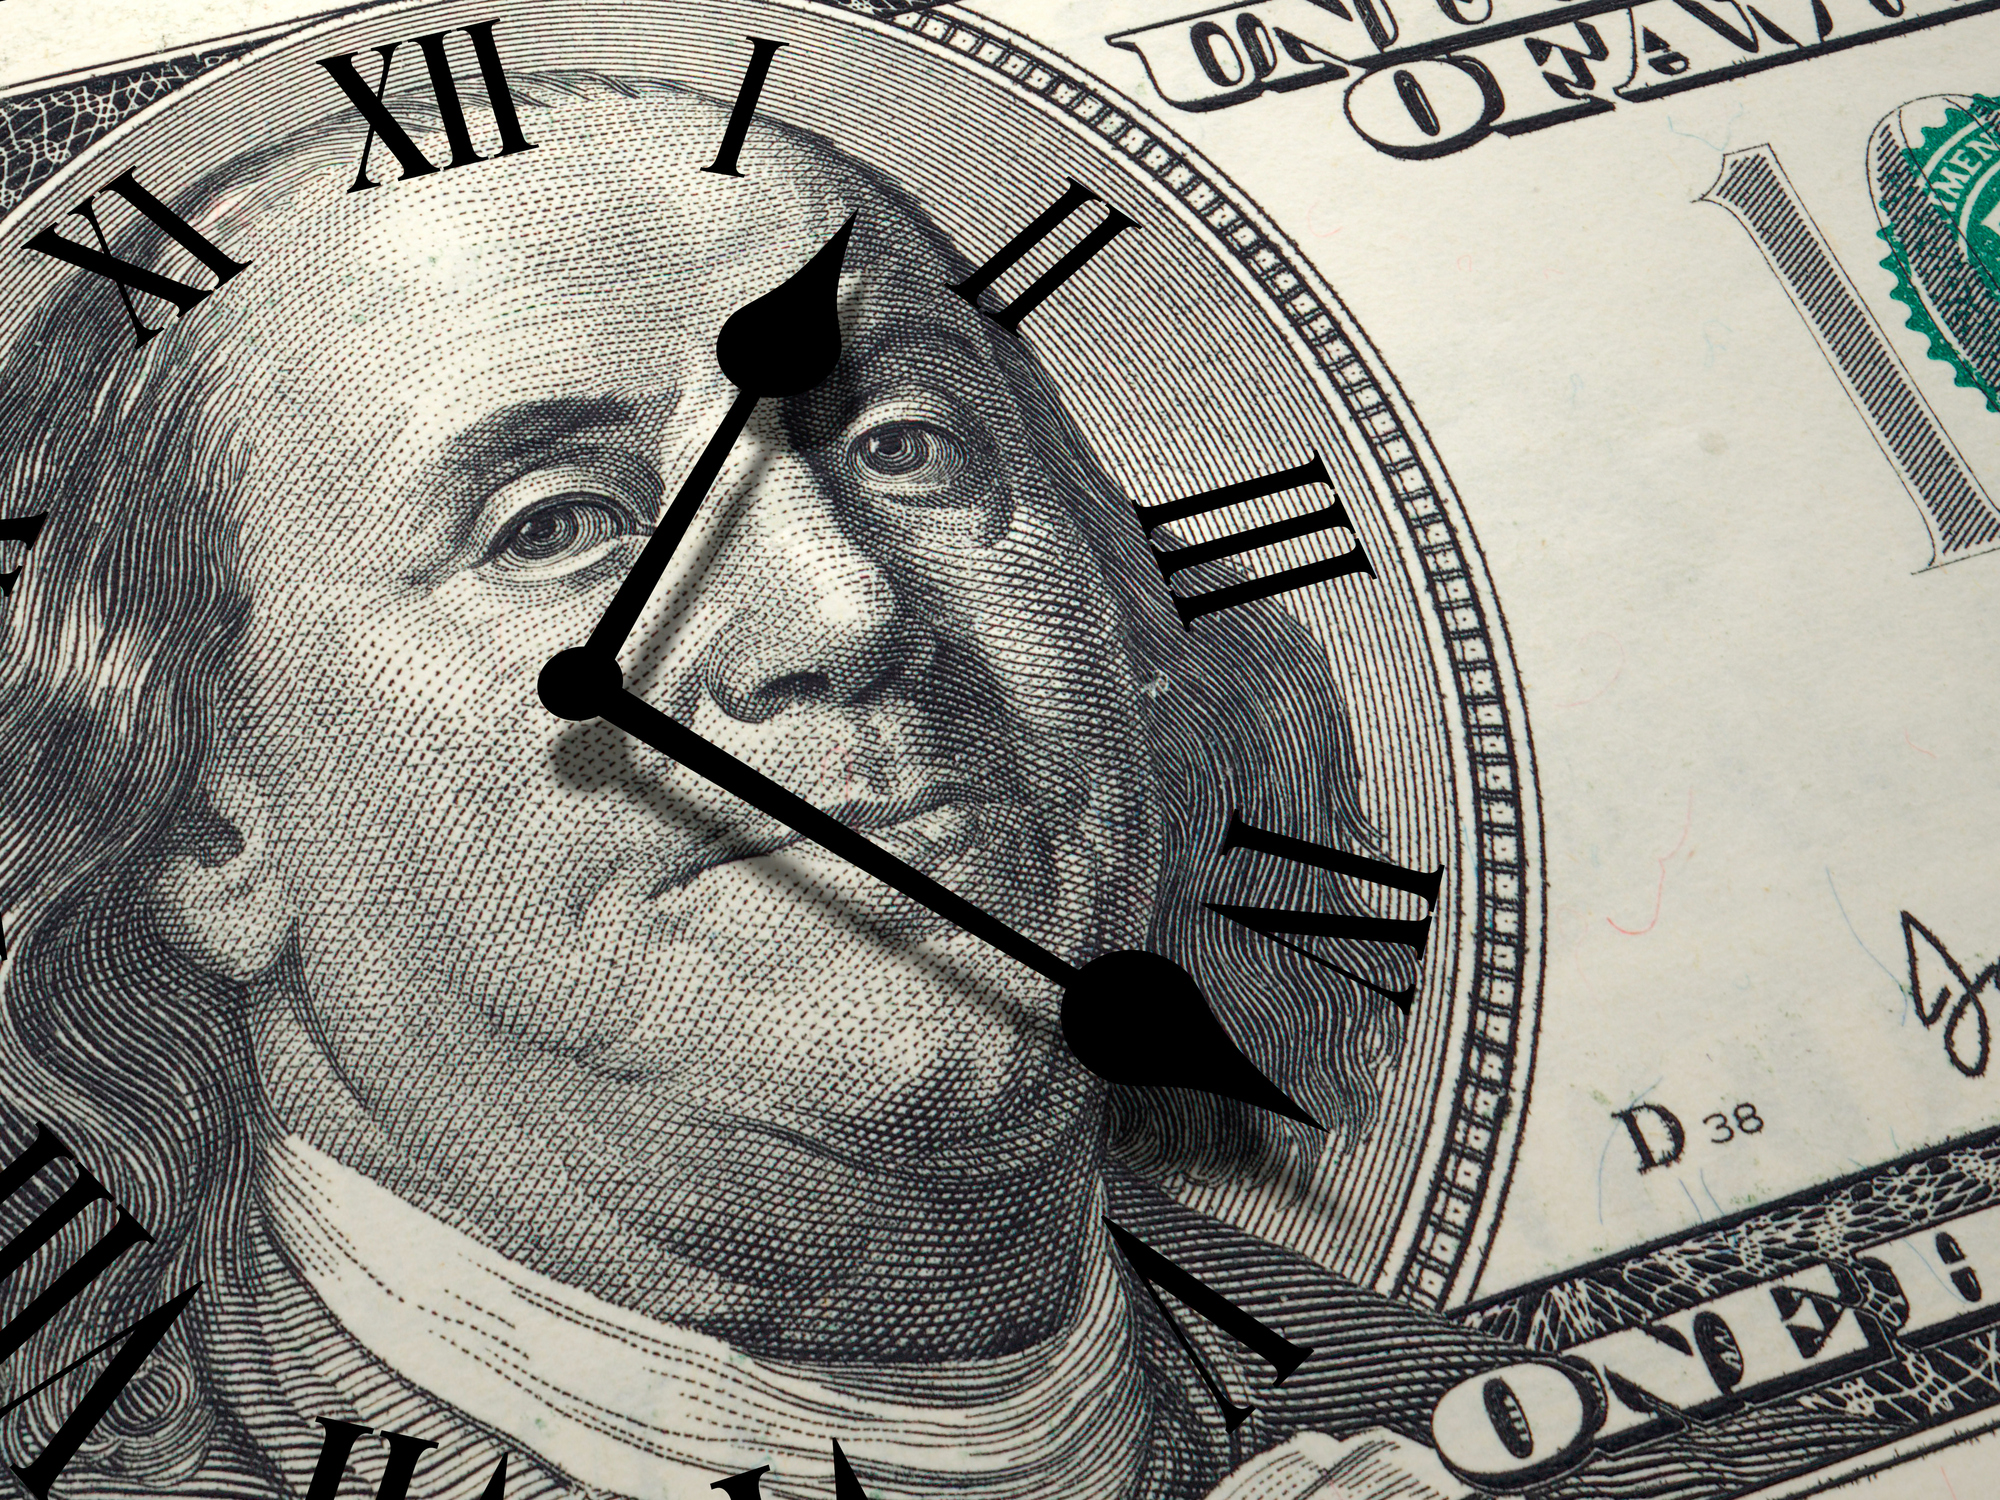 Time is a monetary concept with a hundred dollar bill and a clock face.